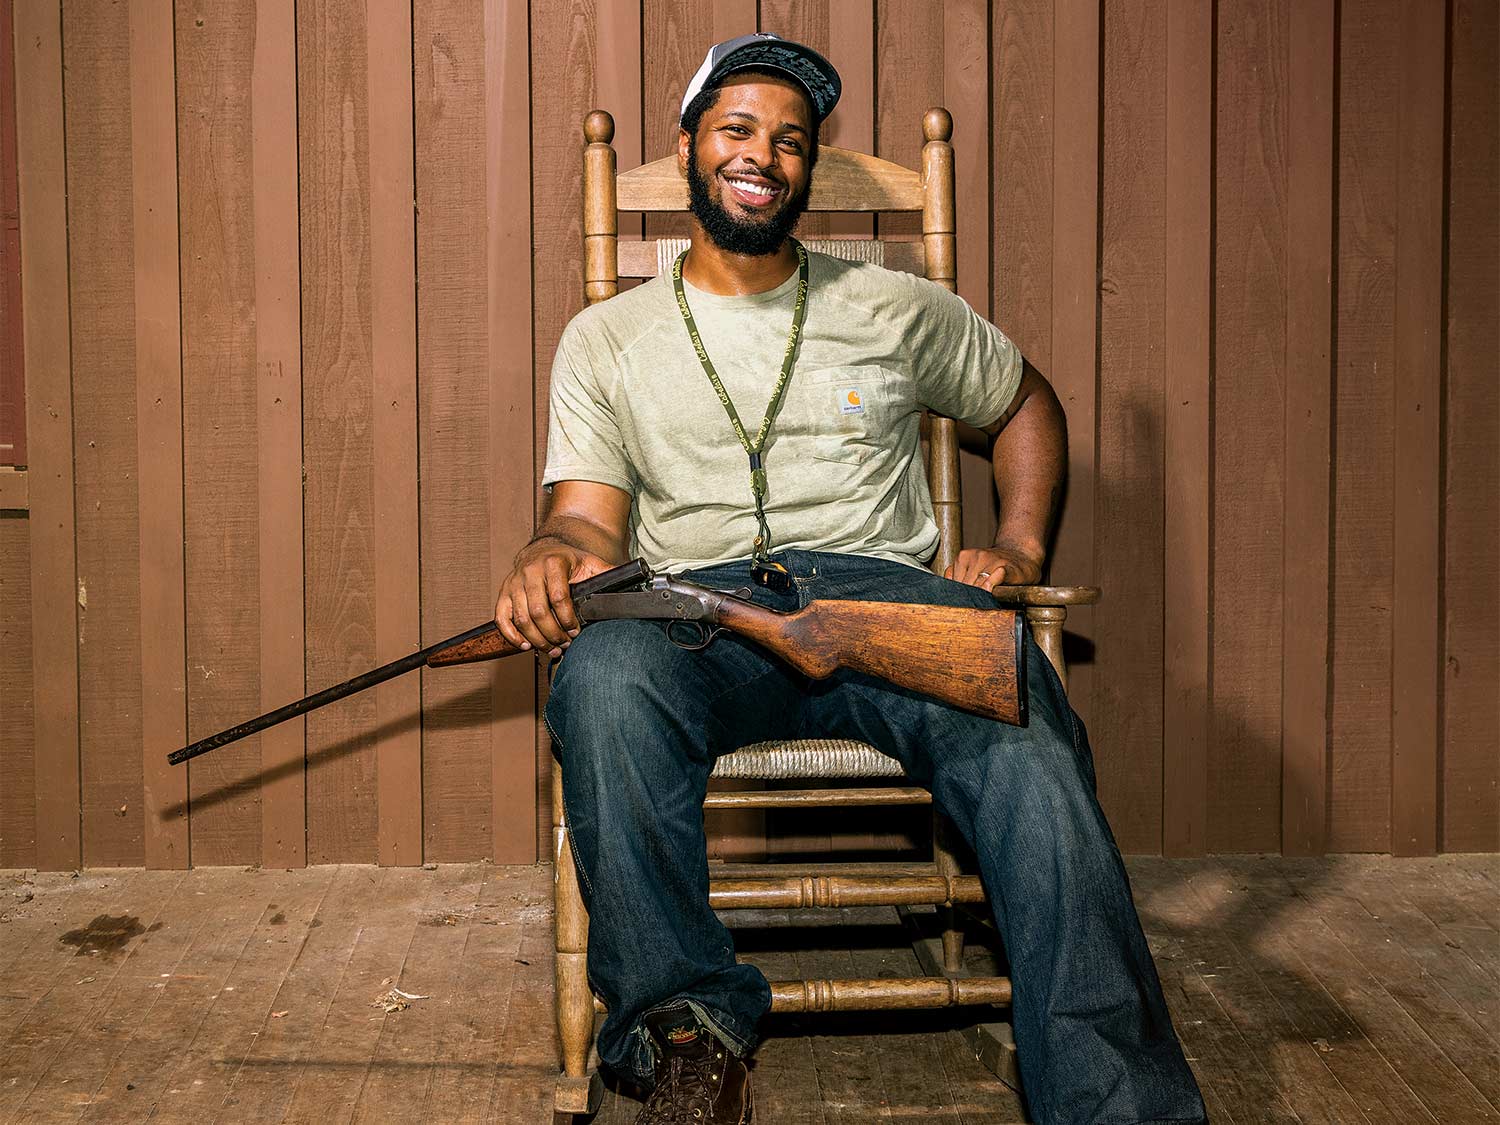 A hunter sits in a rocking chair, smiling, with a gun in his lap.